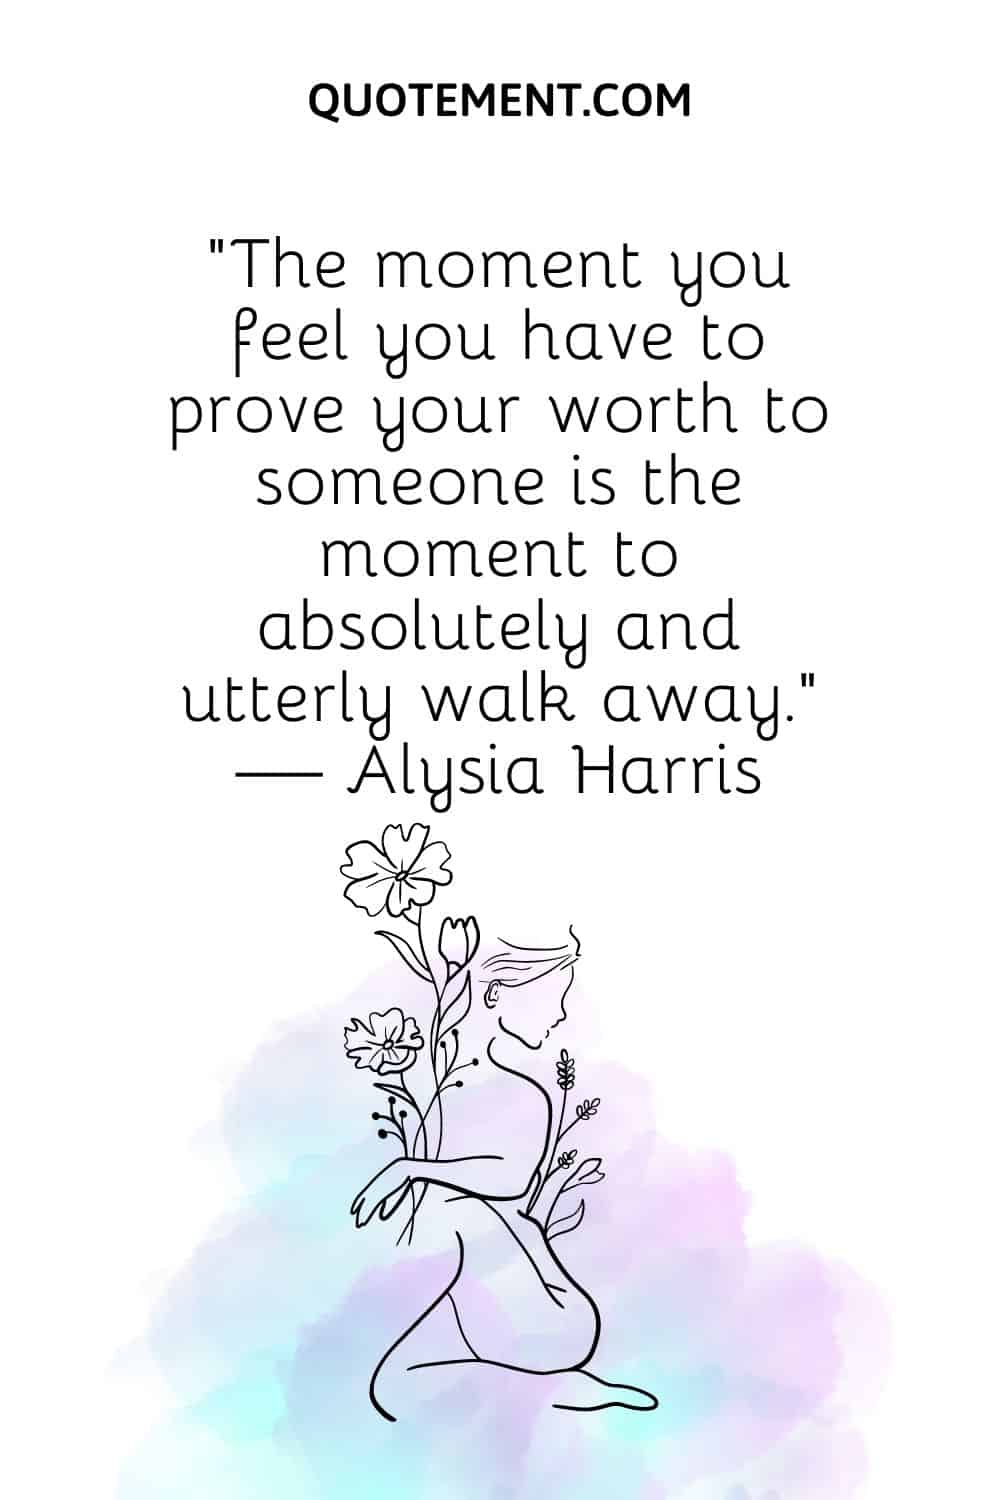 The moment you feel you have to prove your worth to someone is the moment to absolutely and utterly walk away